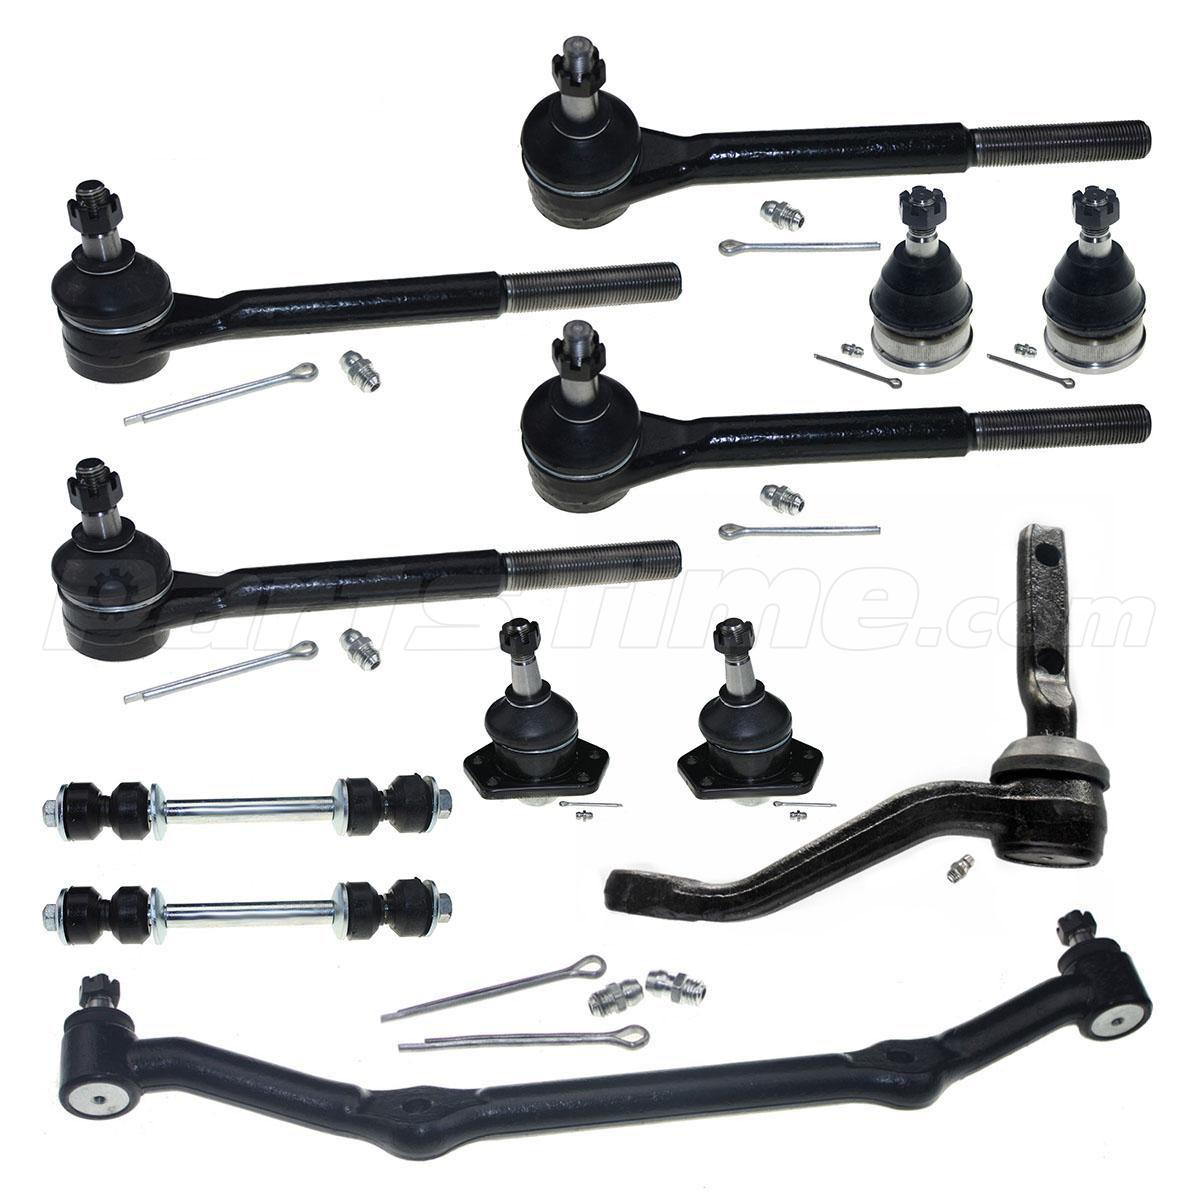 12 Suspension Kit for 1983-1995 Chevrolet S10 2WD 1 Year Warranty